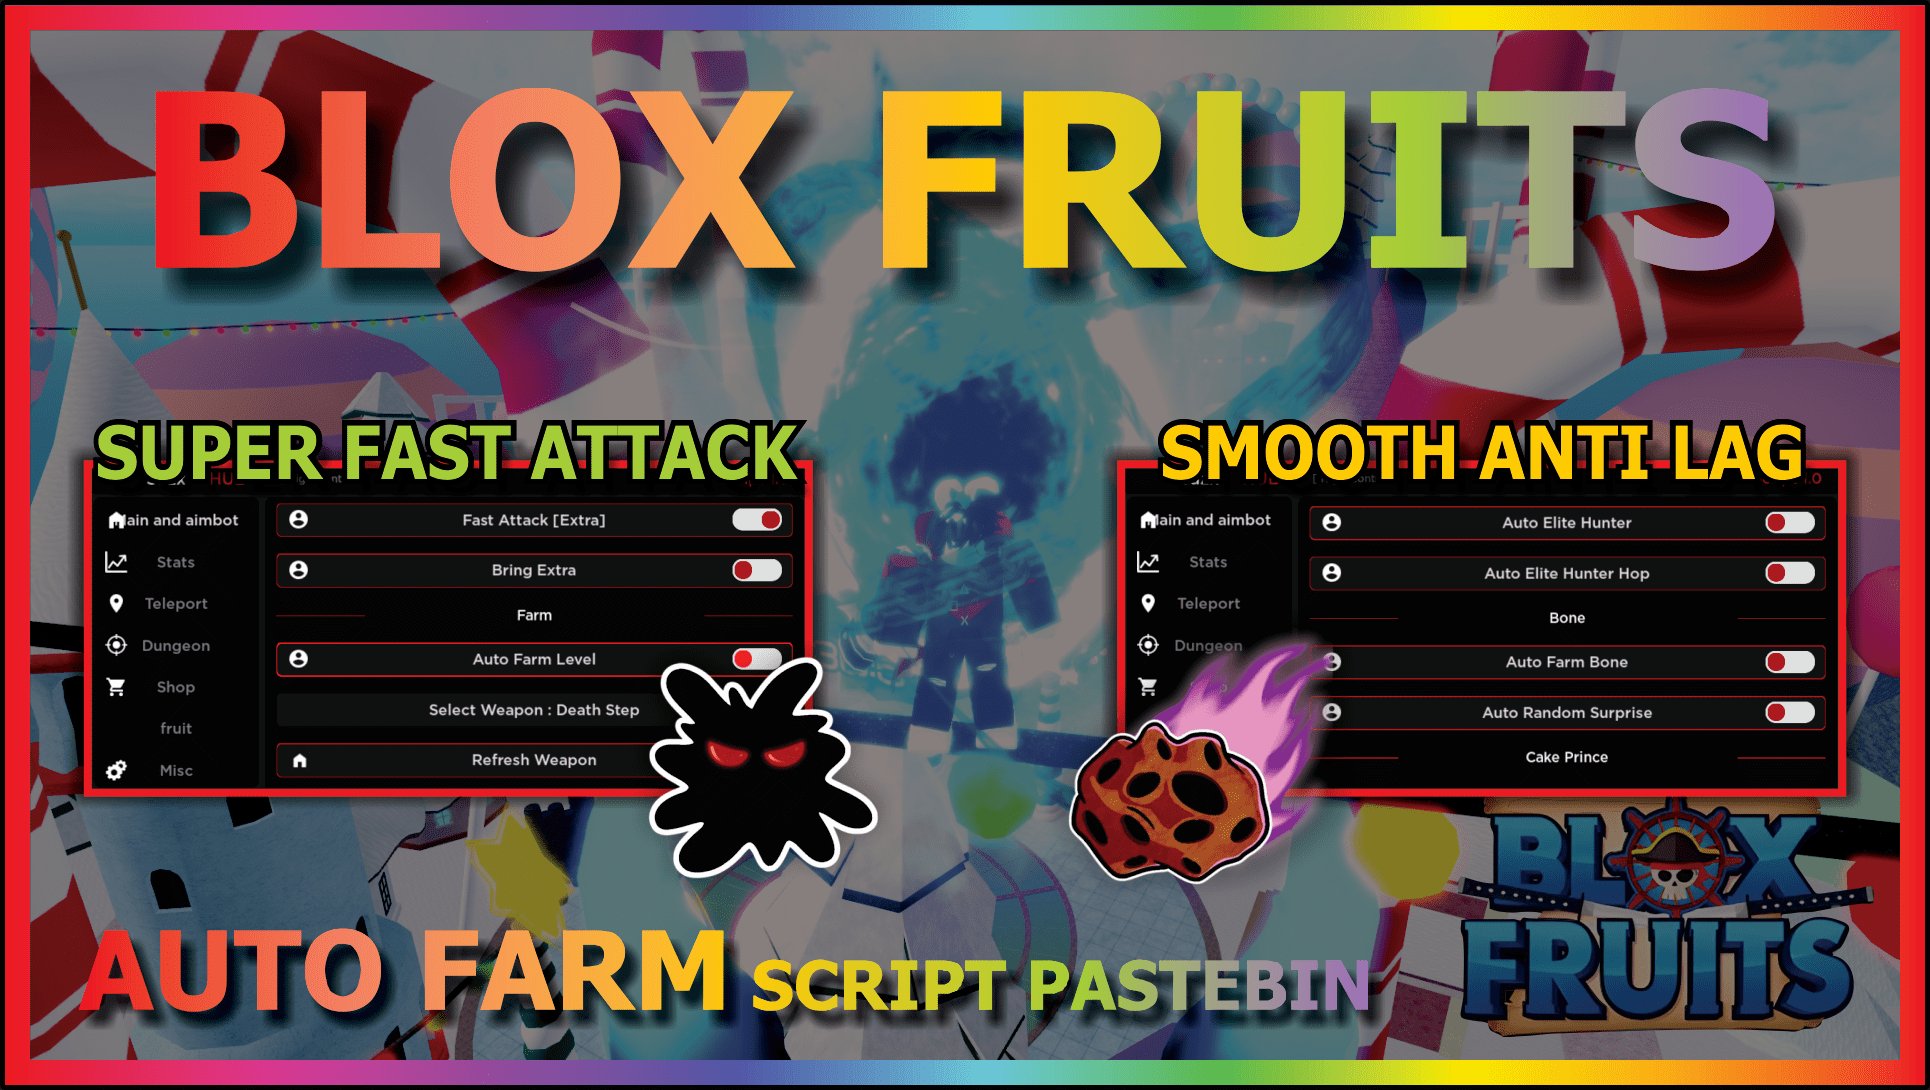 Playlist Blox Fruits Code created by @berryexility